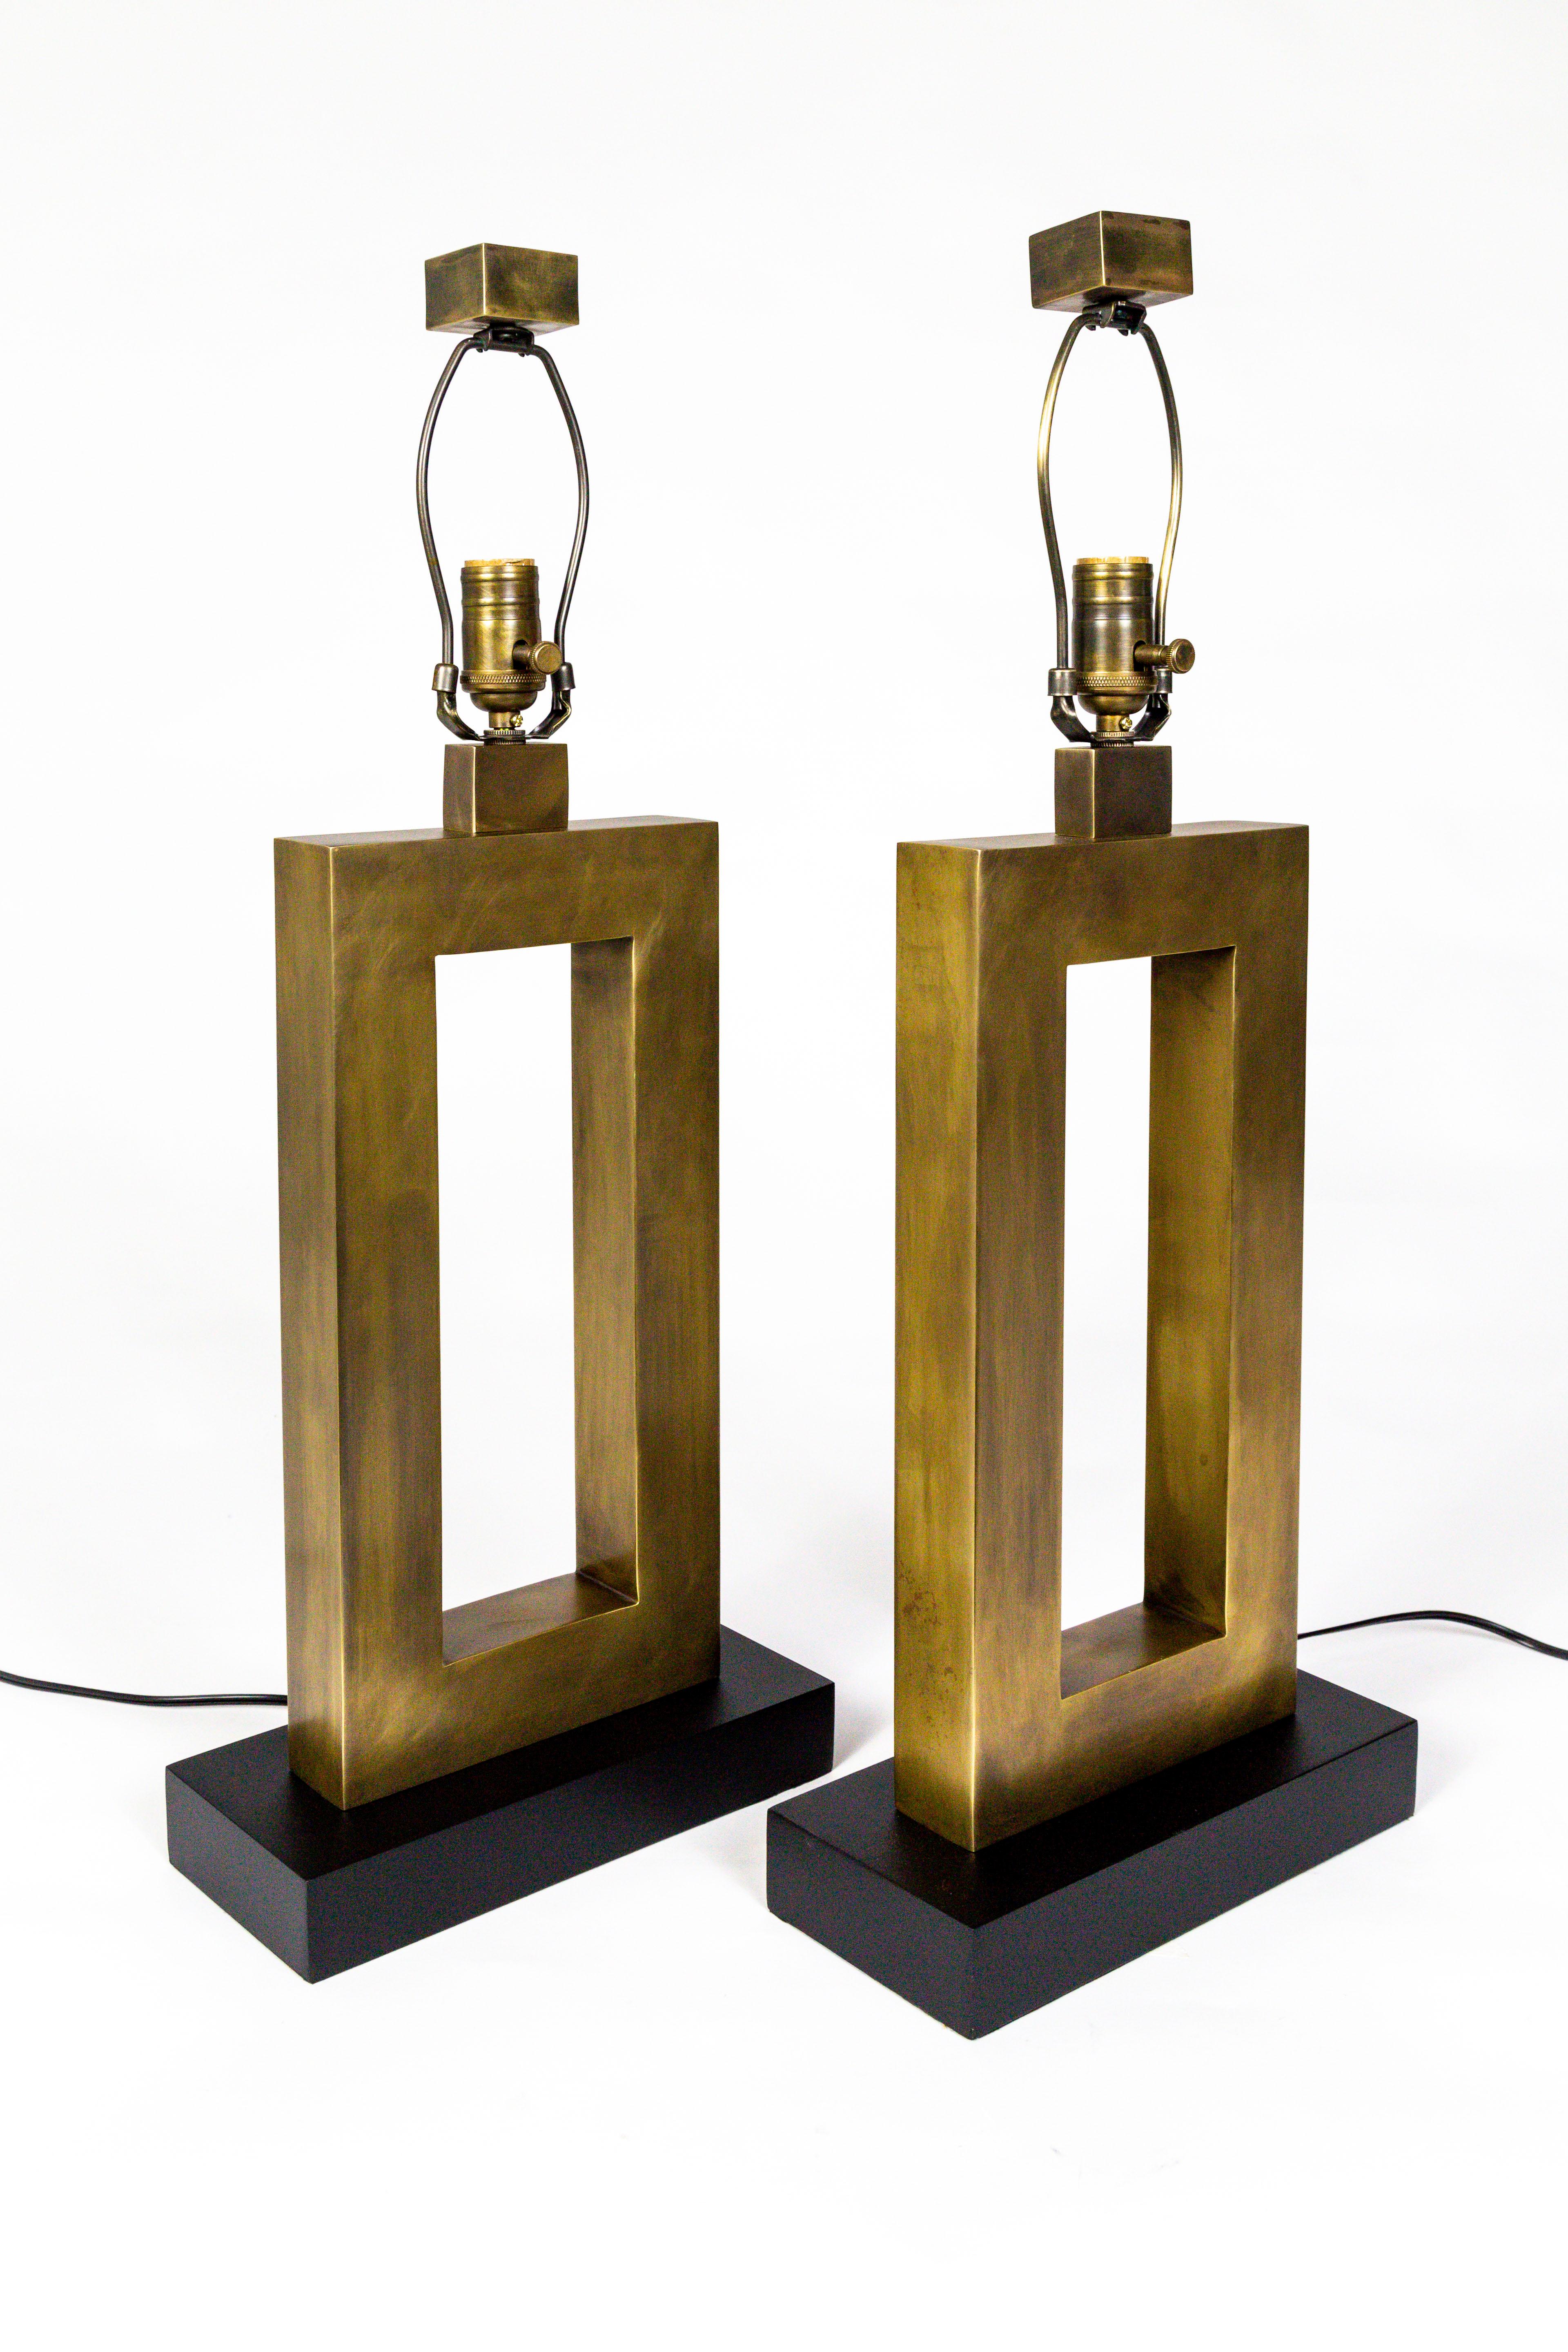 Late 20th Century Rectangular Antiqued Brass Table Lamps, 'Pair'